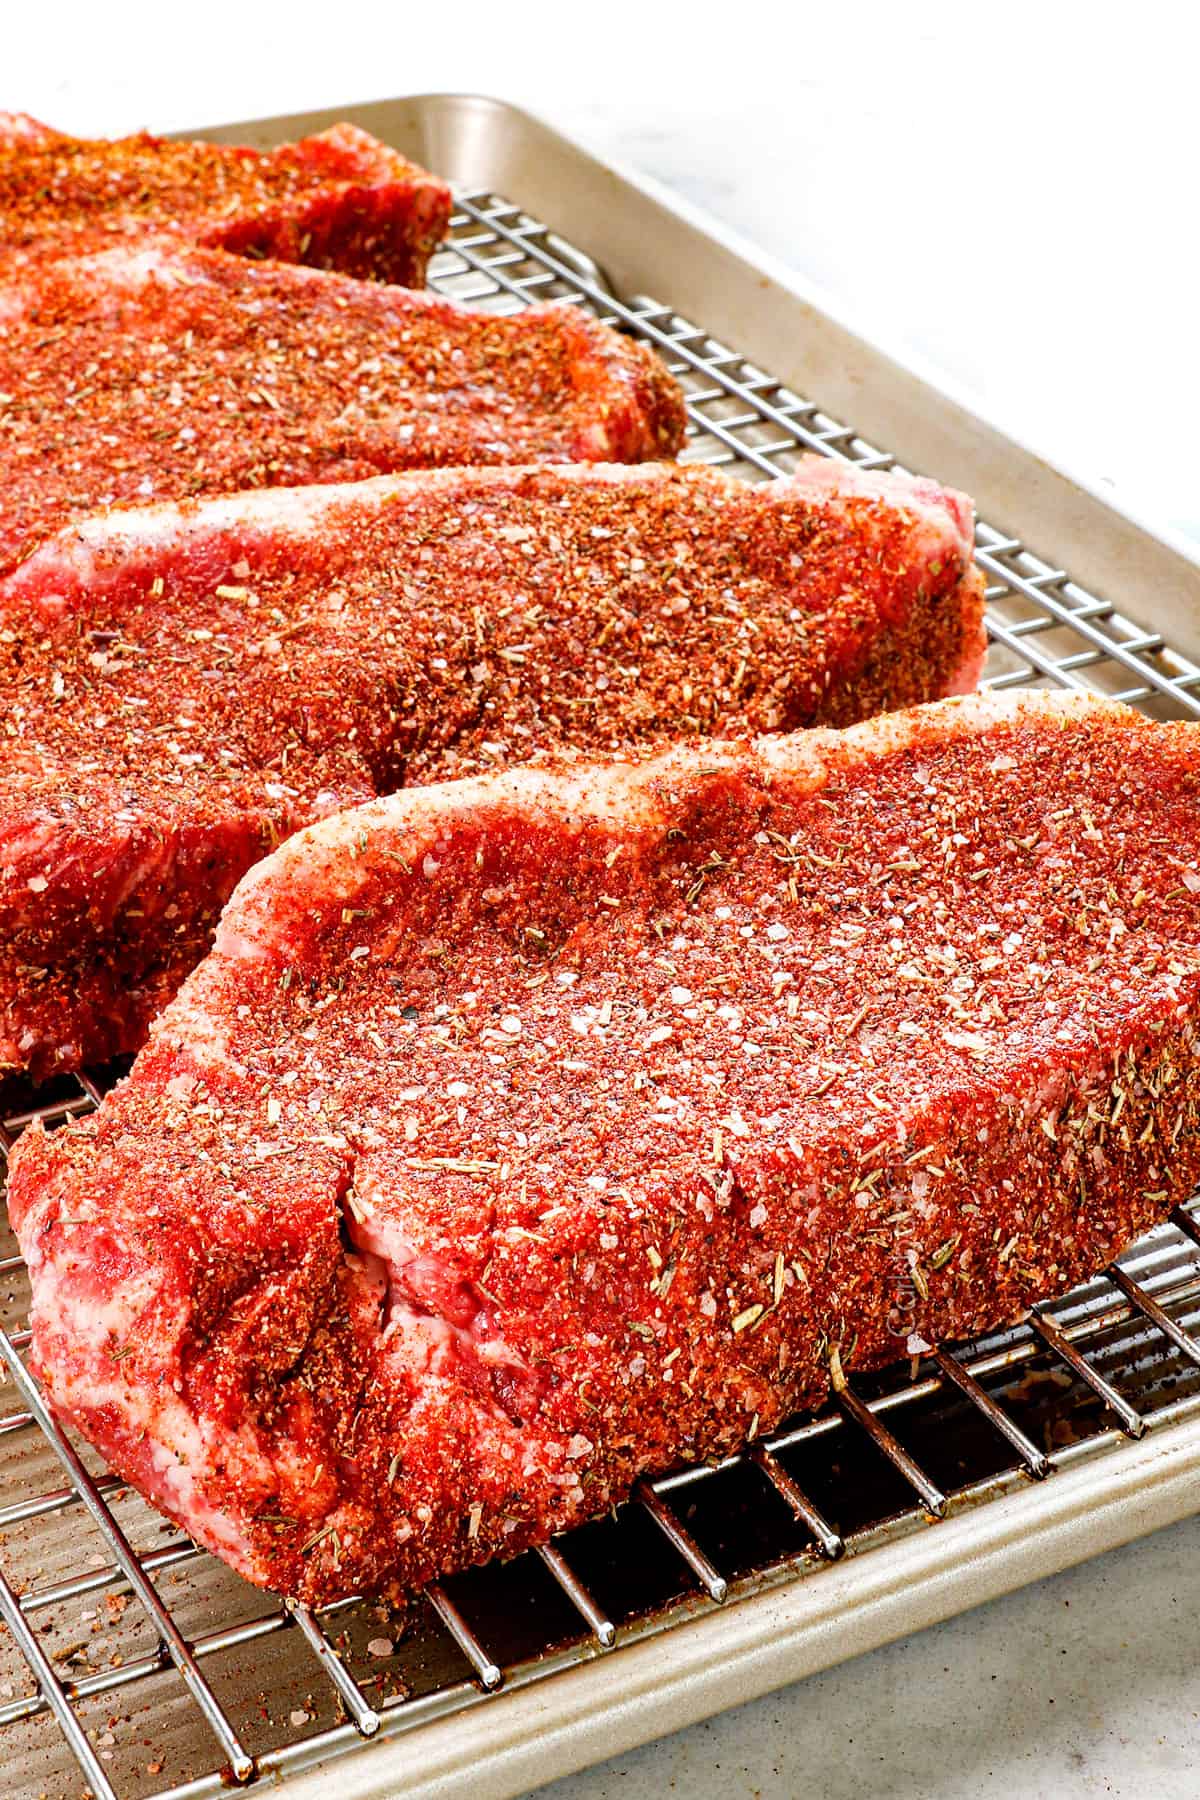 showing how to season steak with steak rub by patting into steaks elevating on a rack